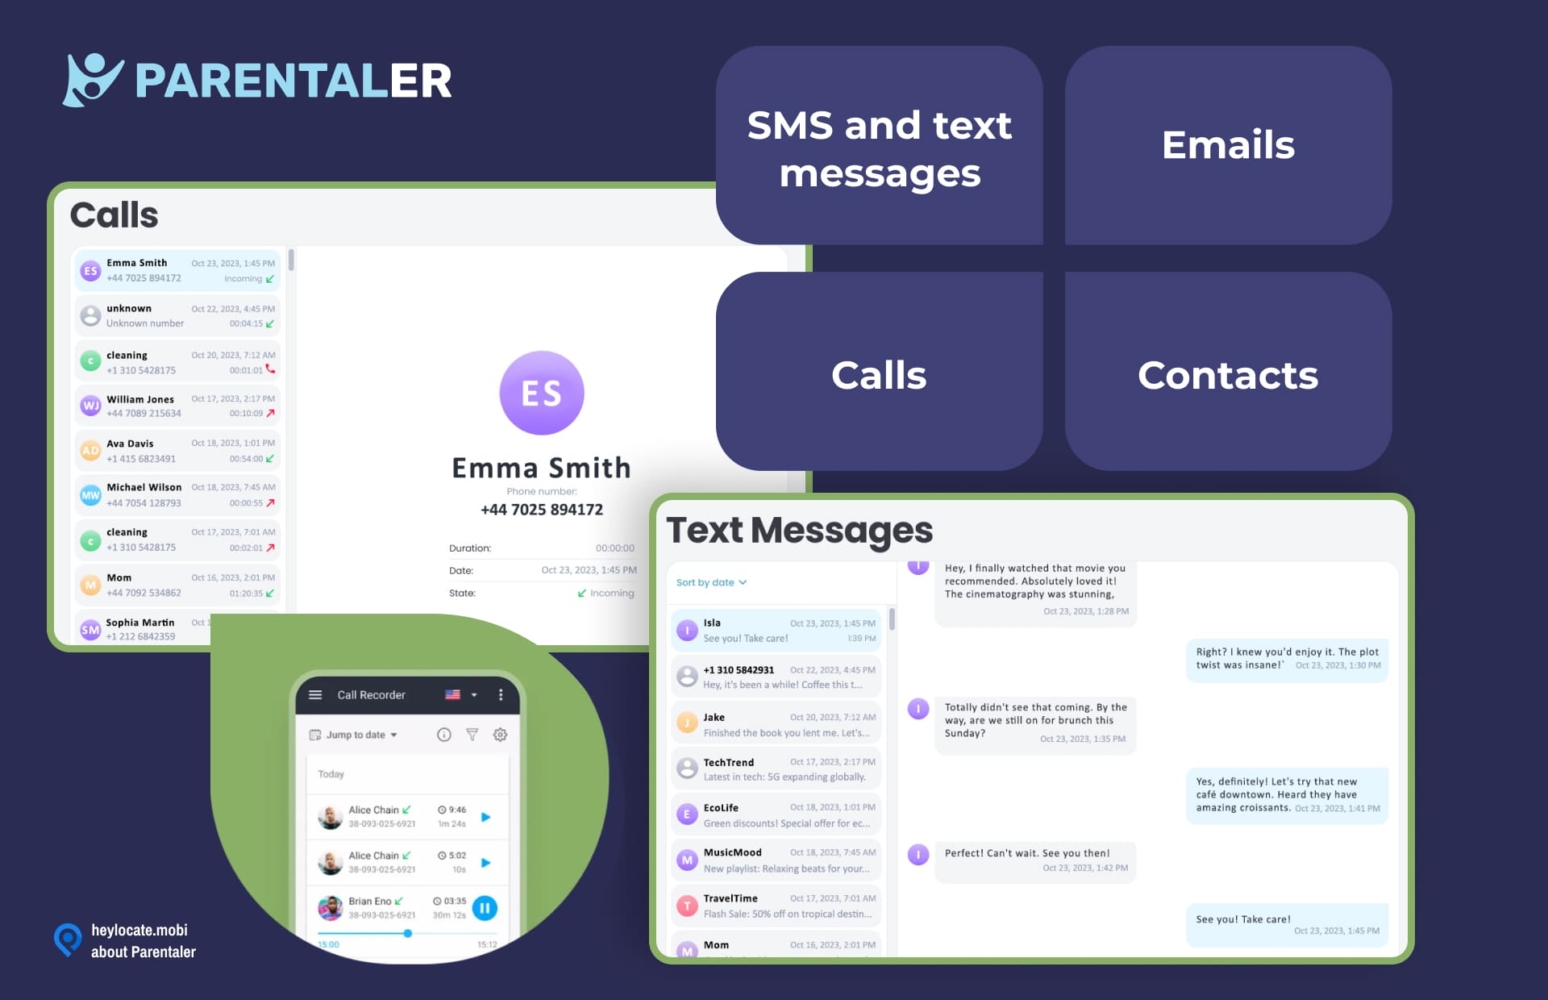 A display of the Parentaler app's communication tracking features showing detailed logs of calls, SMS and text messages, along with a highlighted contact profile and a call recorder interface showcasing recent call activities for comprehensive monitoring of children's phone communication.